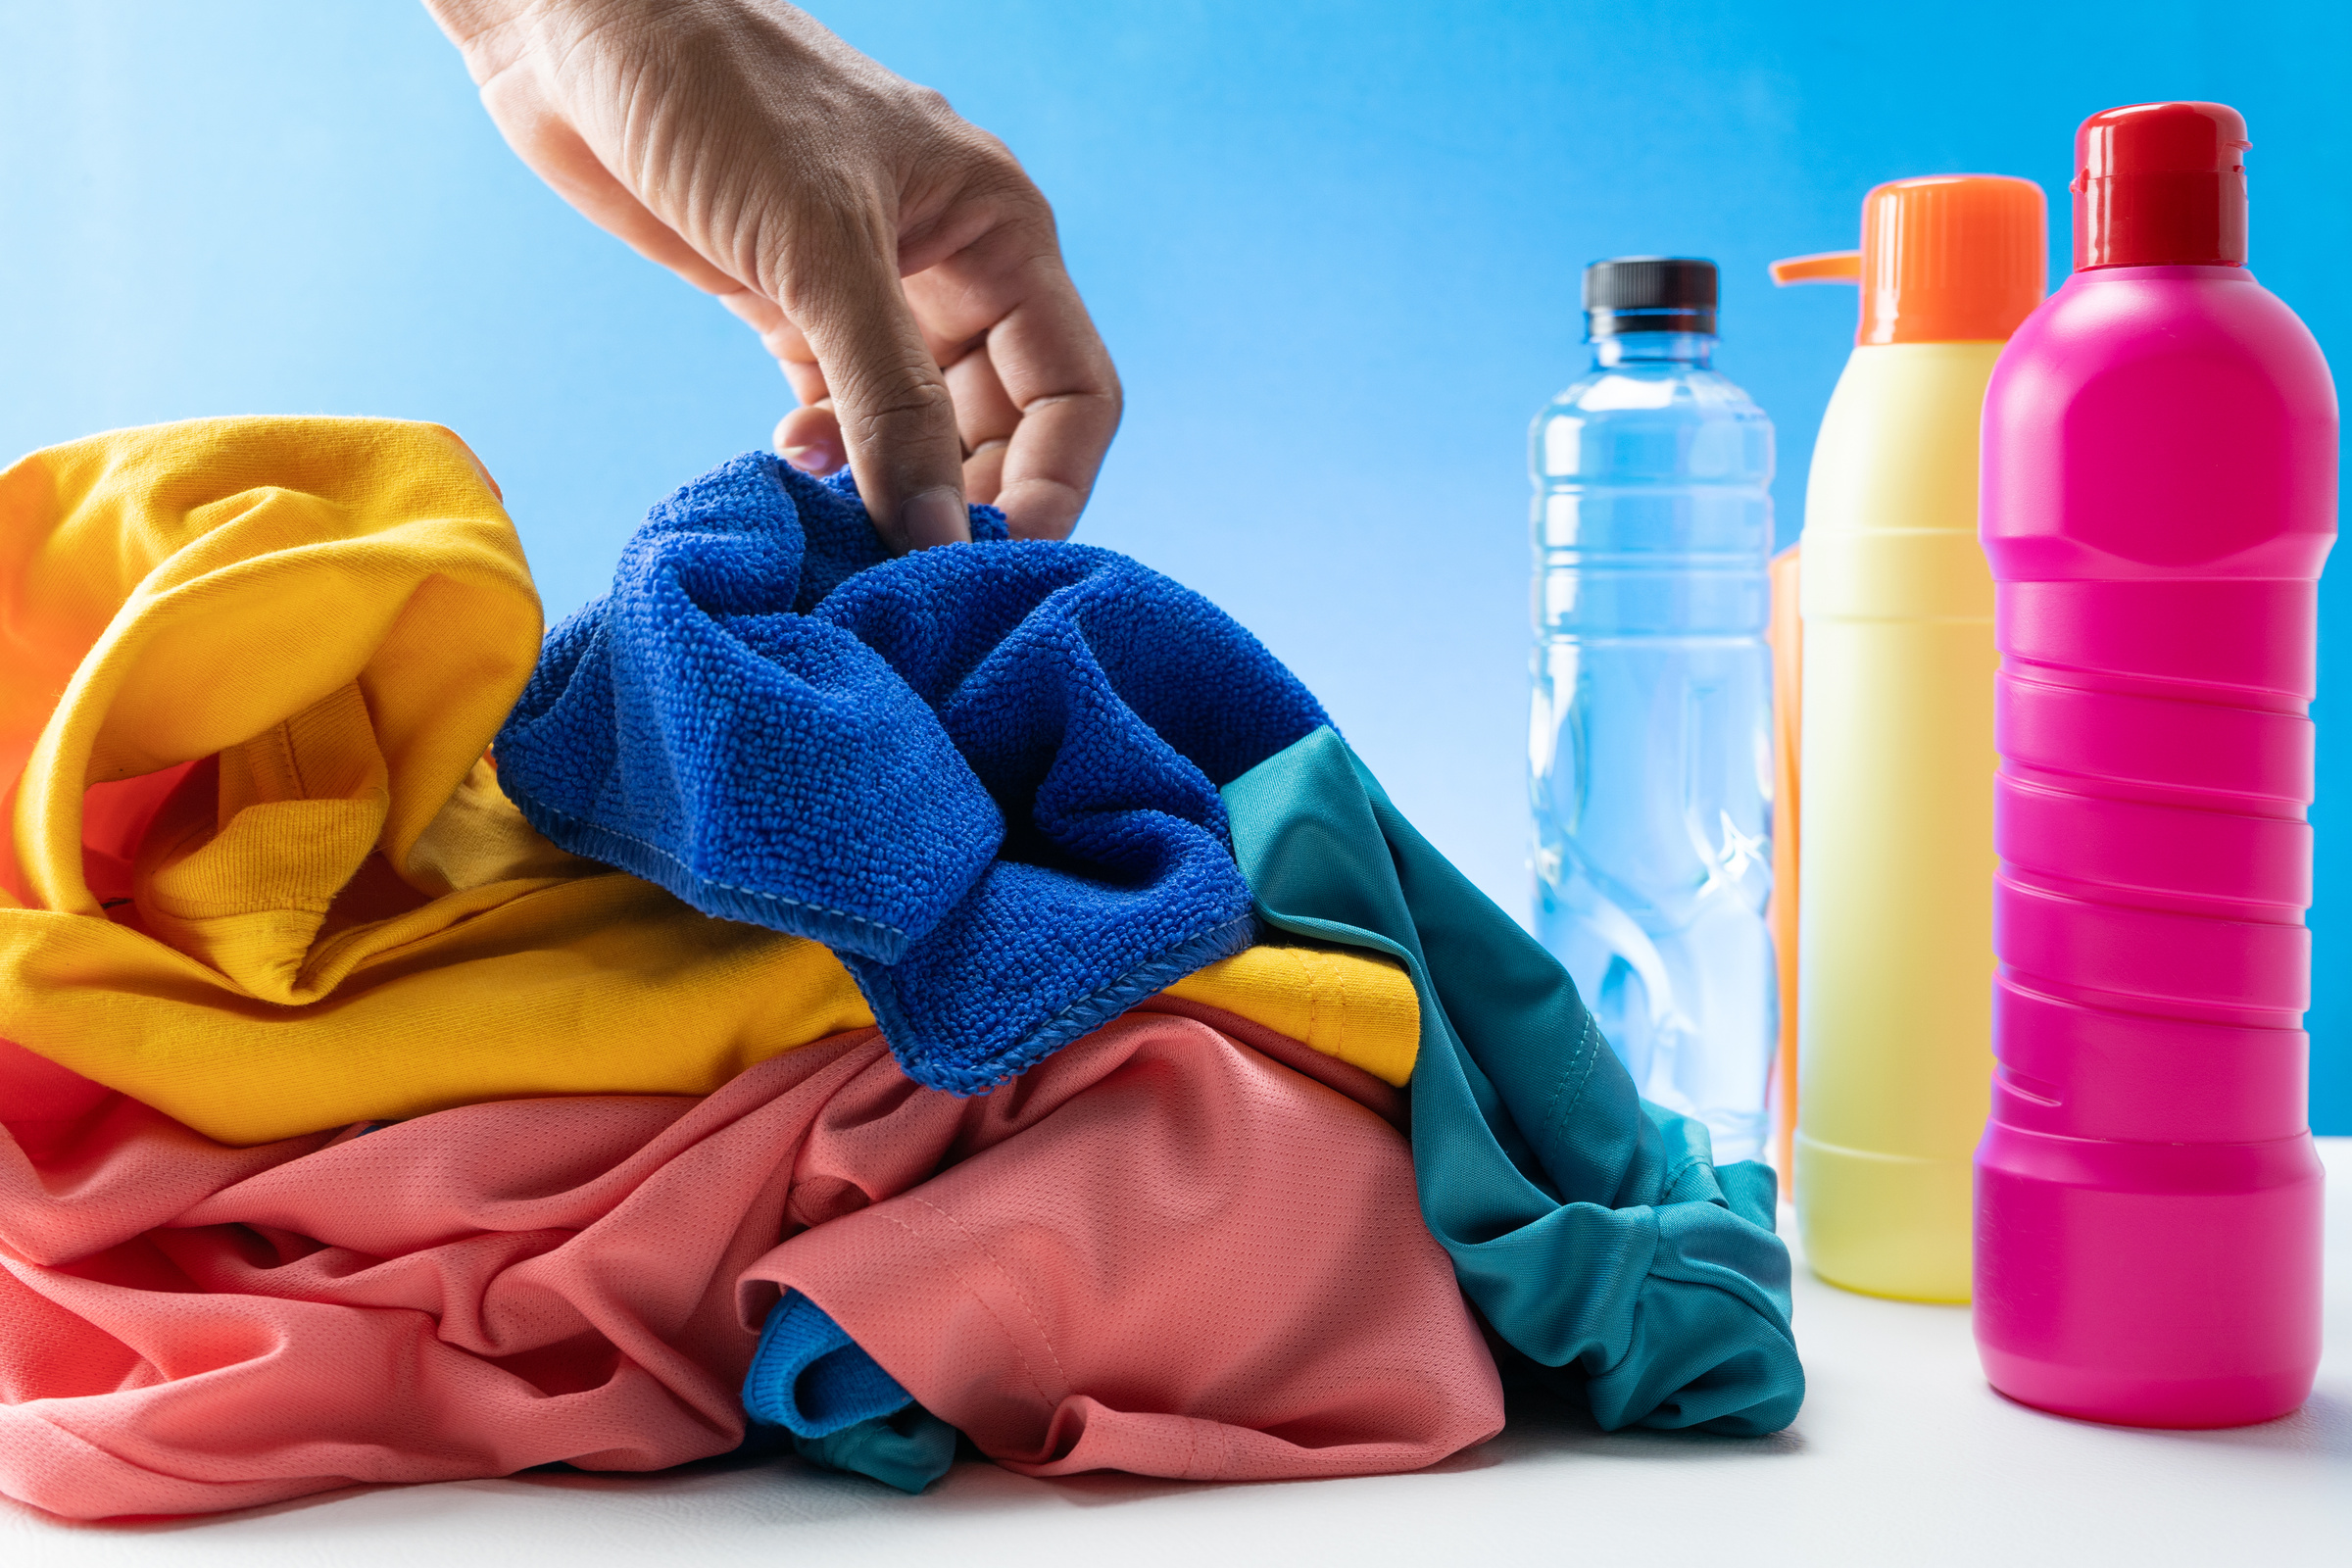 Hand Picking Pile Colorful Clothes Near Bottles of Cleaning Products